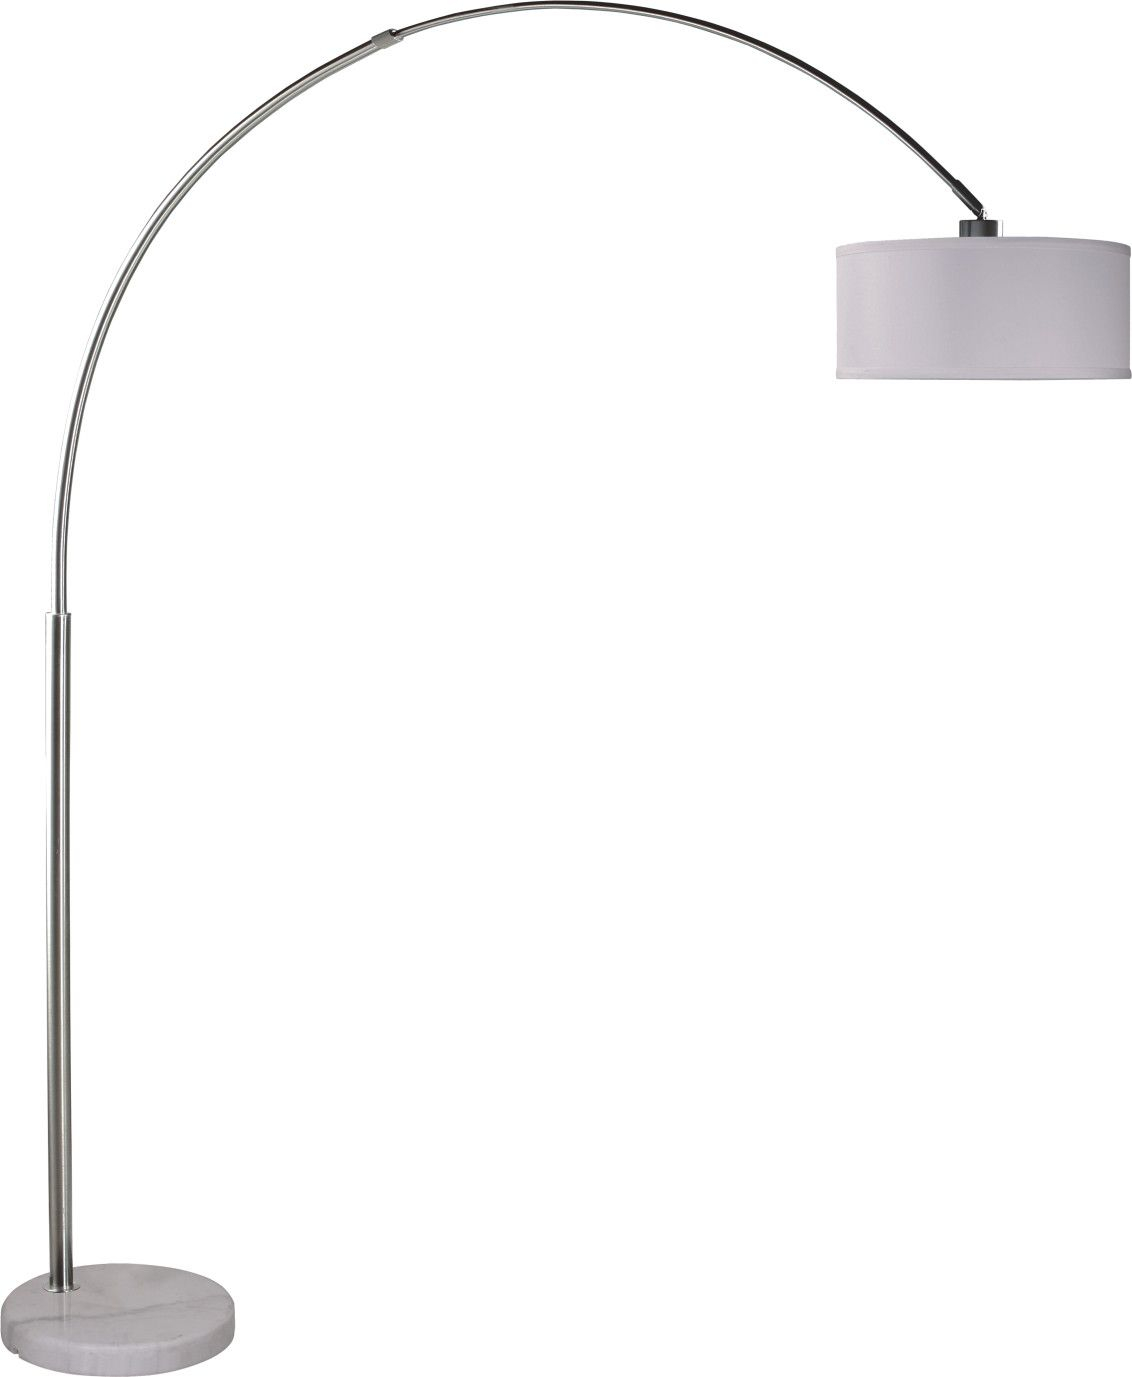 Maui 81 Arched Floor Lamp Products Arc Floor Lamps regarding size 1132 X 1377